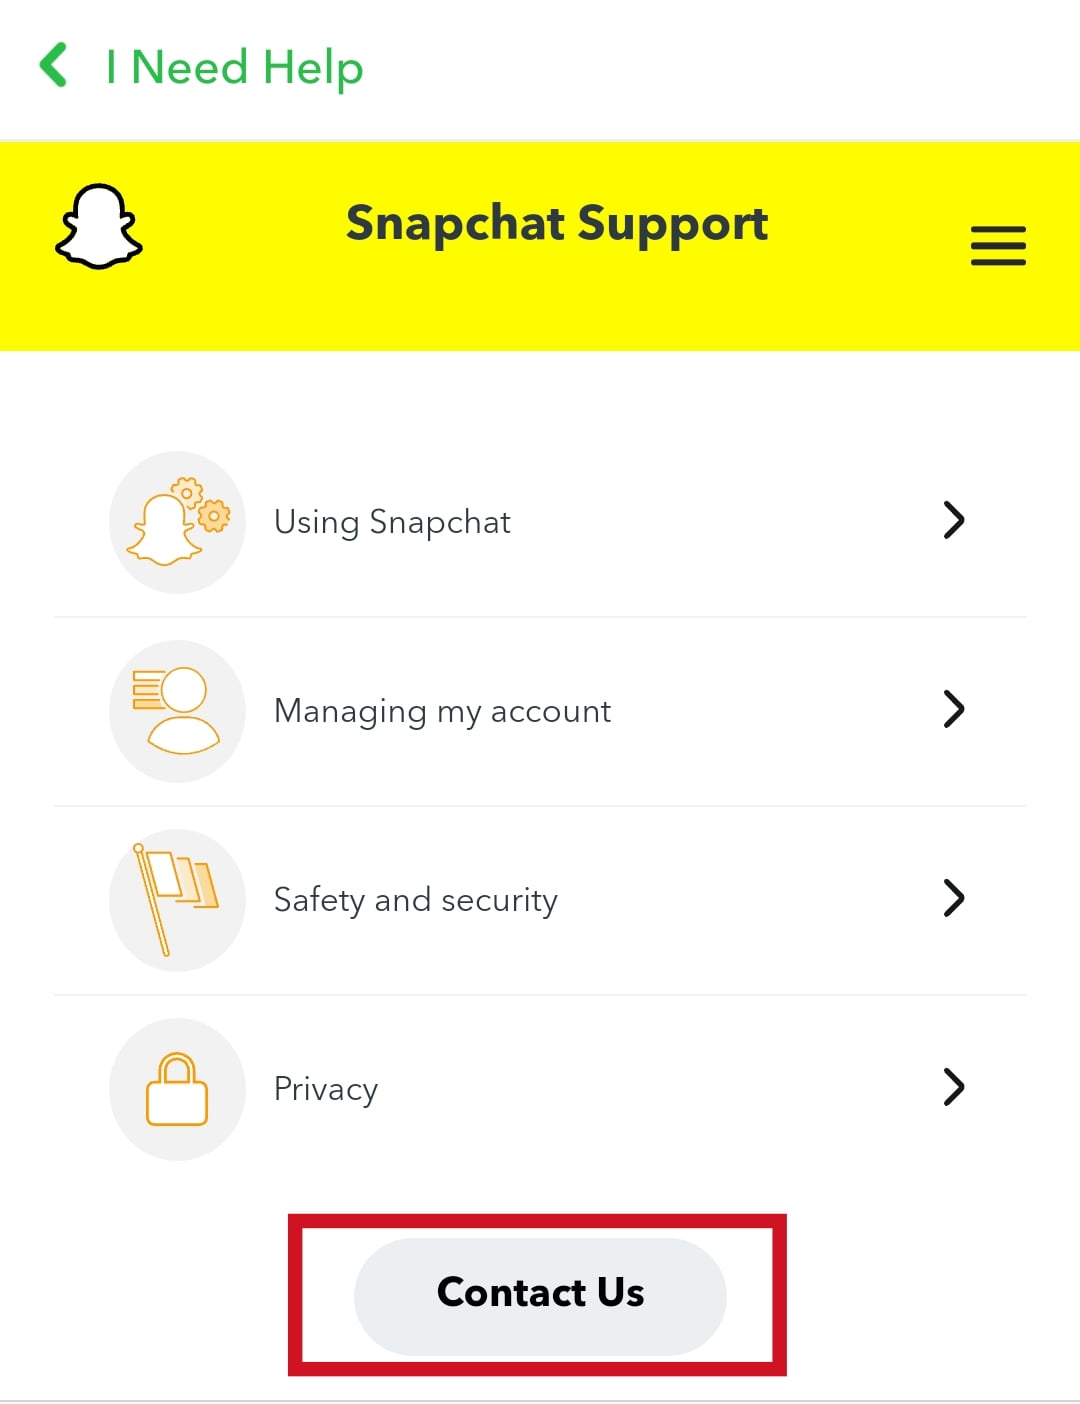 Contact Snapchat support Direct from the App